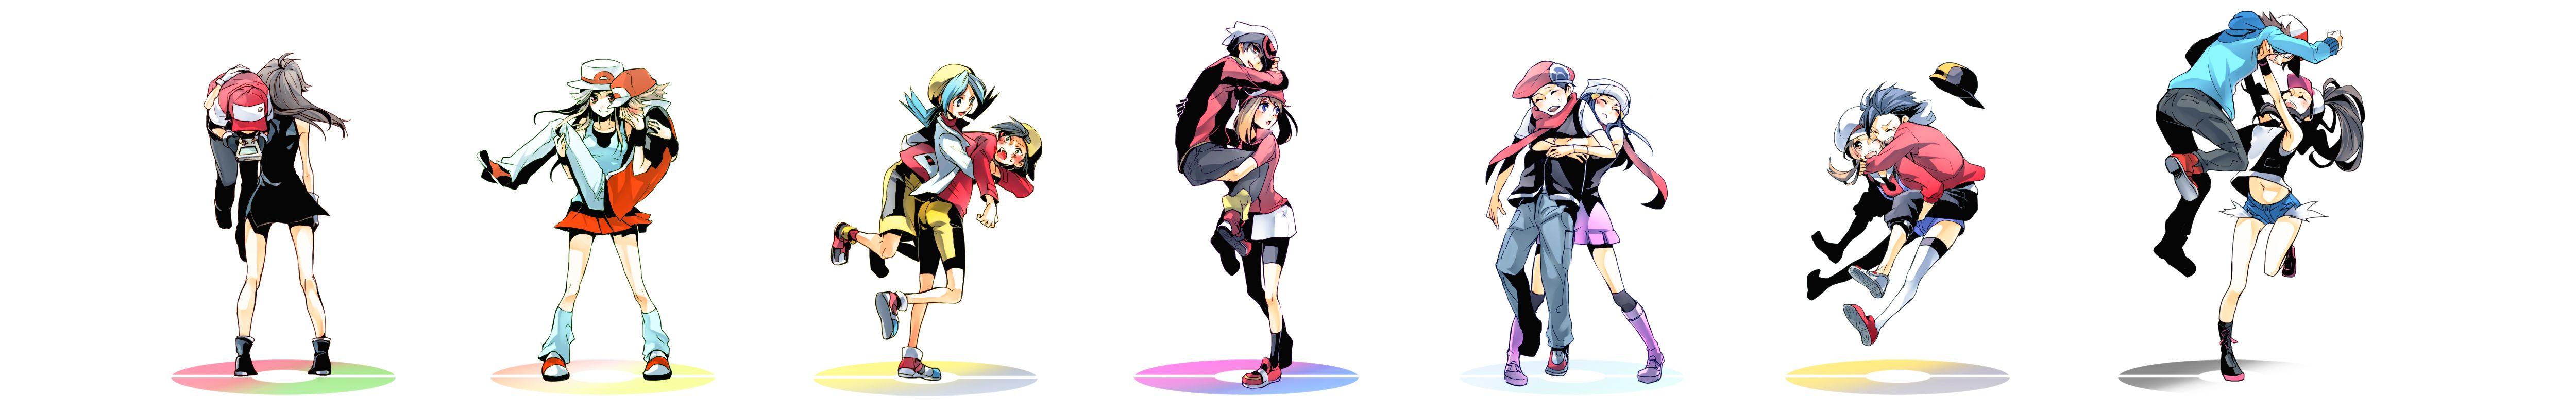 Pokemon Trainers Wallpaper and Backgroundx800